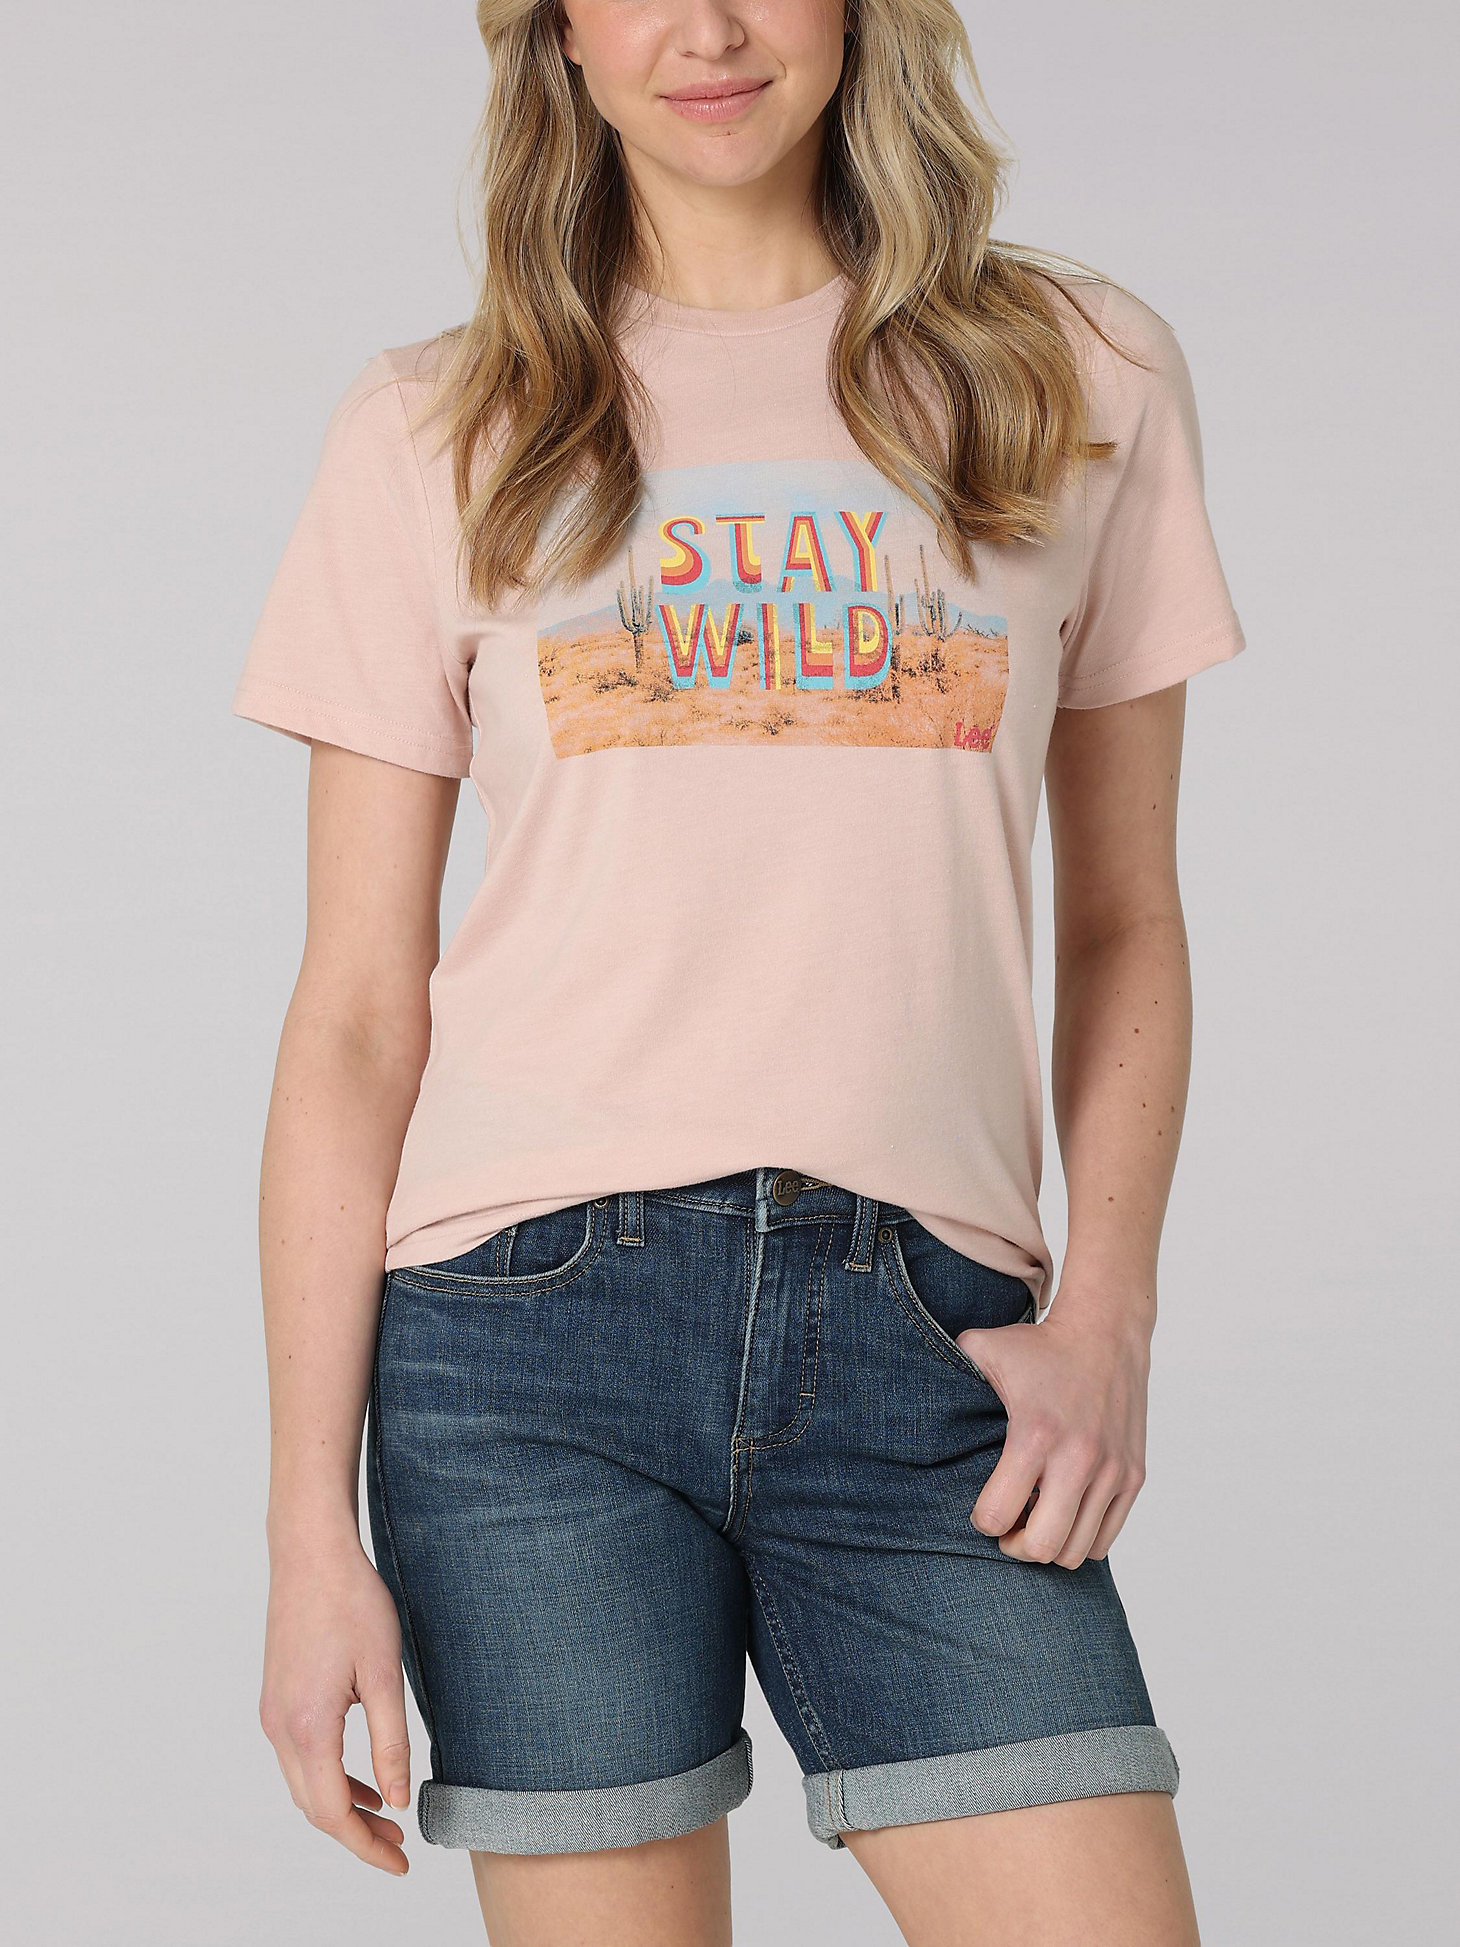 Women's Lee Stay Wild Graphic Tee in Peach Whip Heather main view